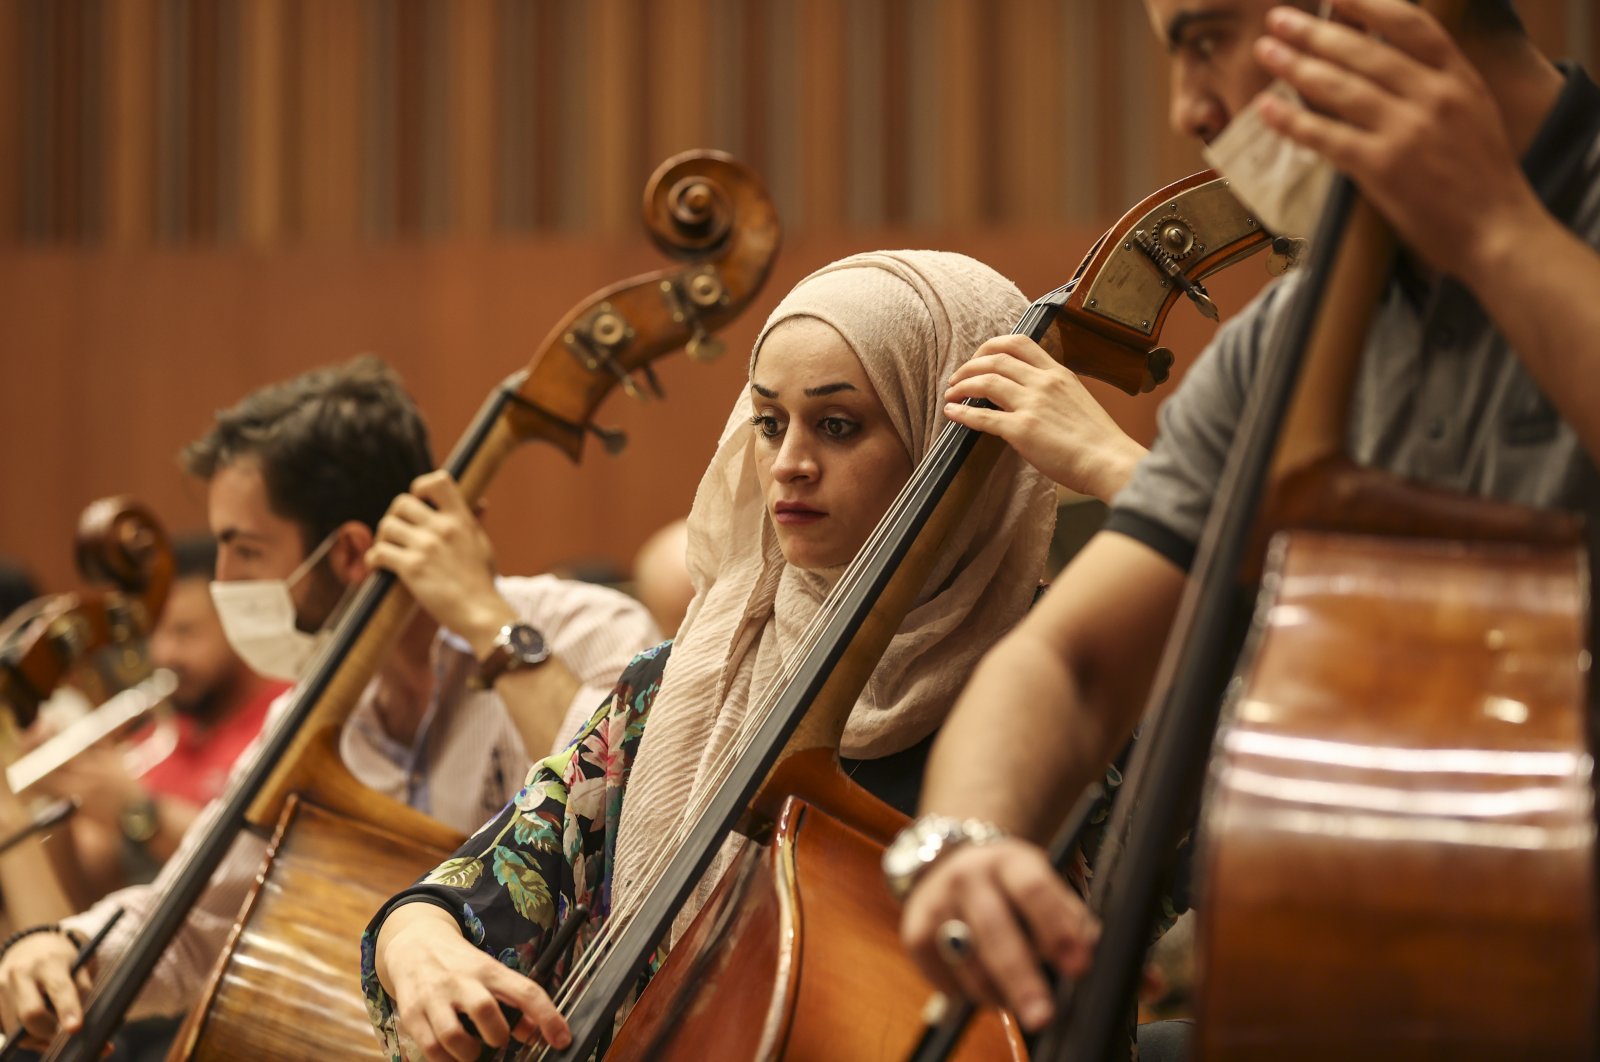 The Palestinian Youth Orchestra, which came to Turkey upon the invitation of first lady Emine Erdoğan, and the symbol of the Palestinian resistance, Mariam Afifi (C), will perform at the Presidential Symphony Orchestra (CSO) on July 19 in the &quot;Palestine-Turkey Peace Concert,&quot; Ankara, Turkey, July 16, 2022. (AA Photo)